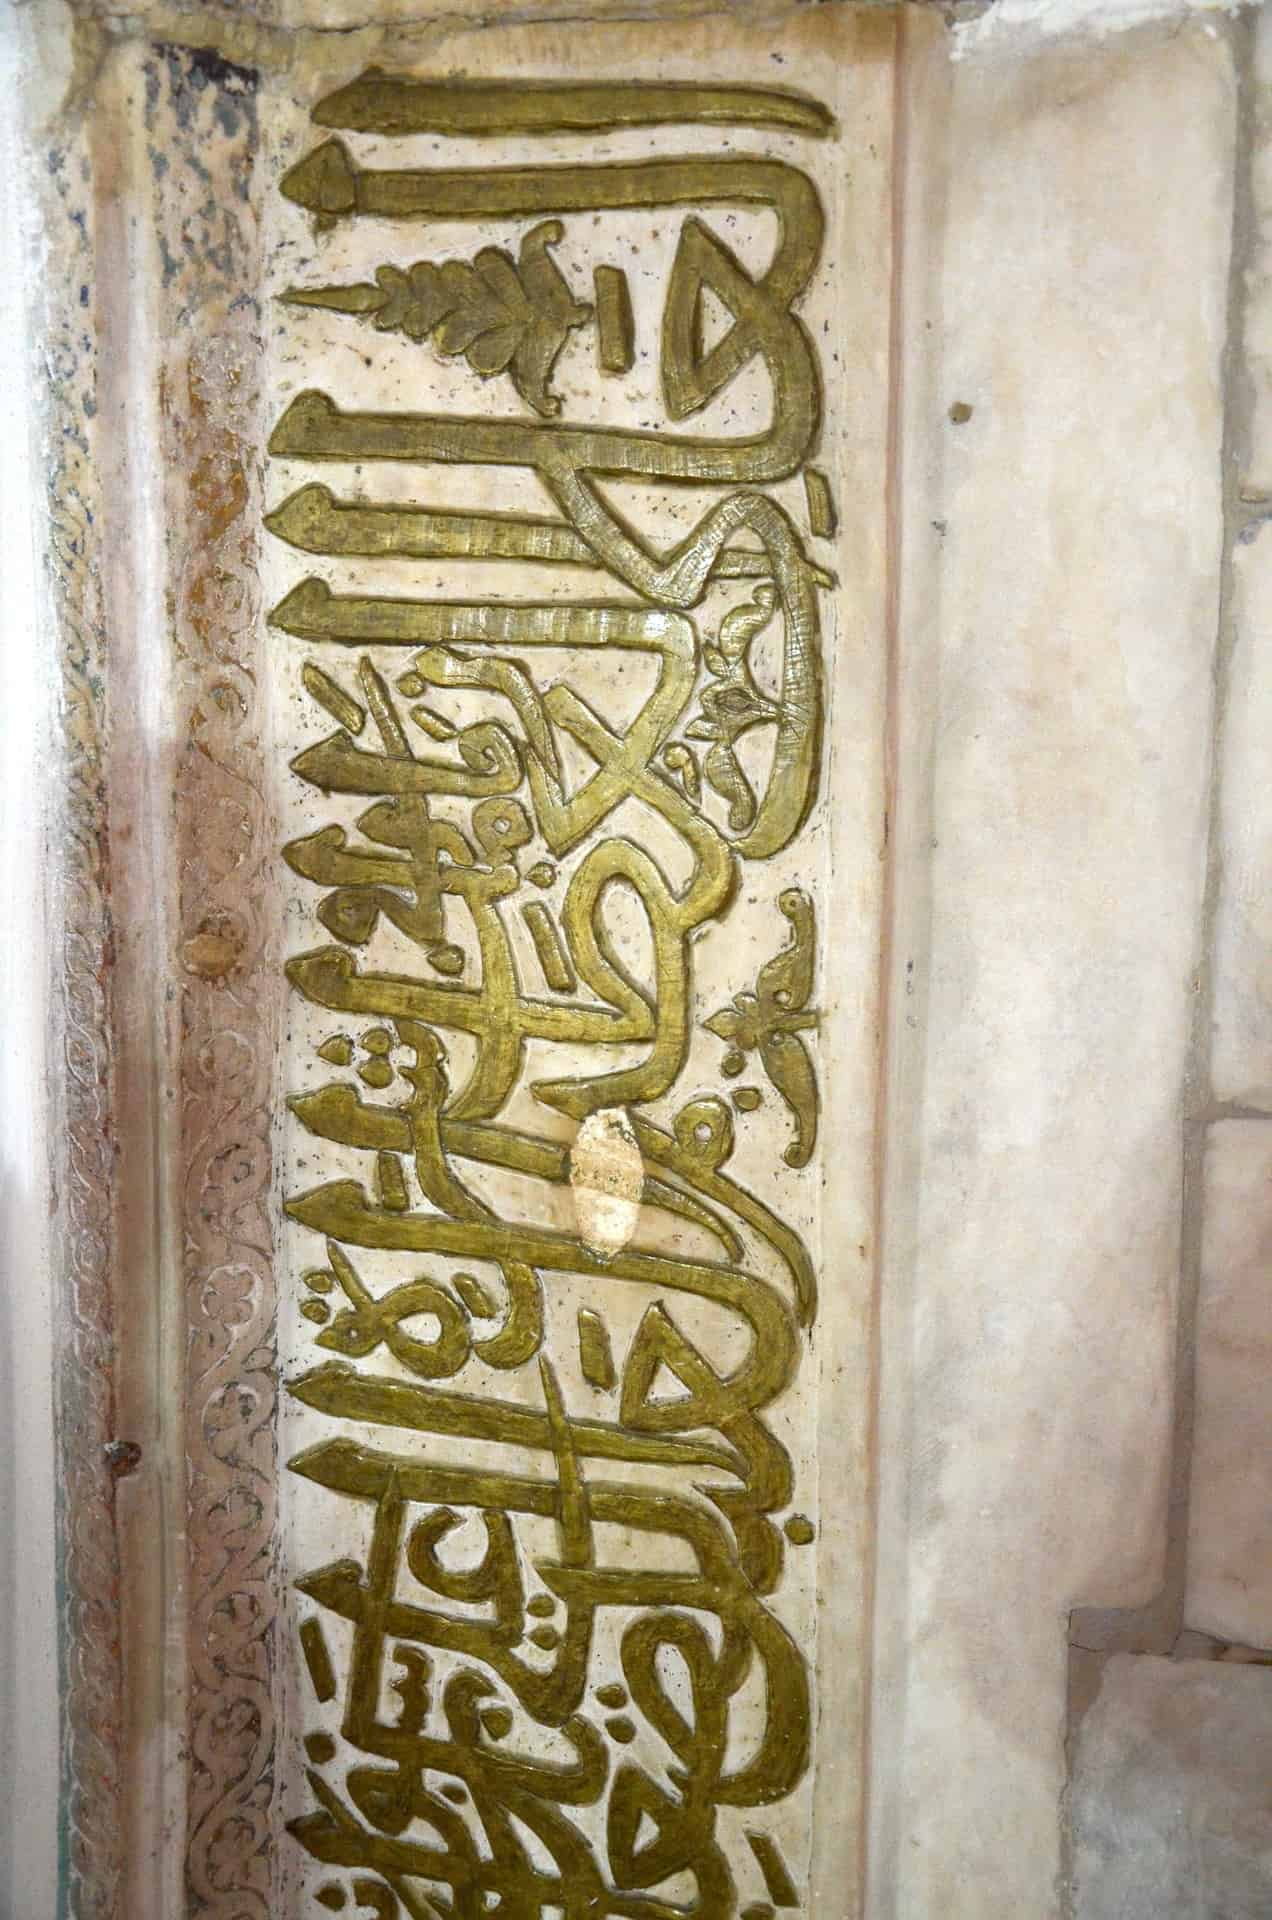 Quranic script around the mihrab of the Great Mosque